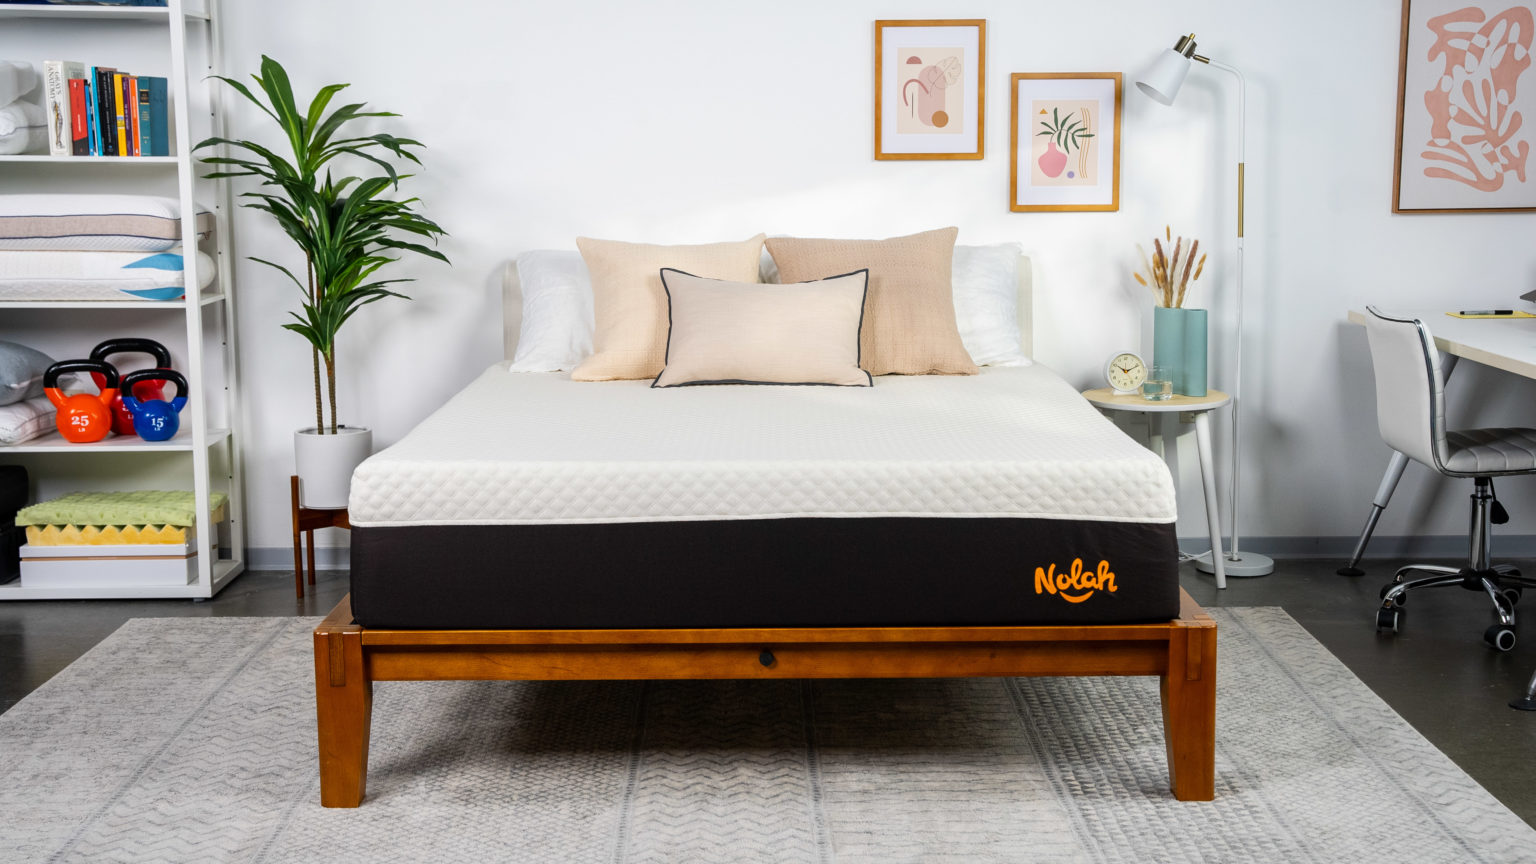 A picture of the Nolah Signature Mattress in Sleep Foundation's test lab.